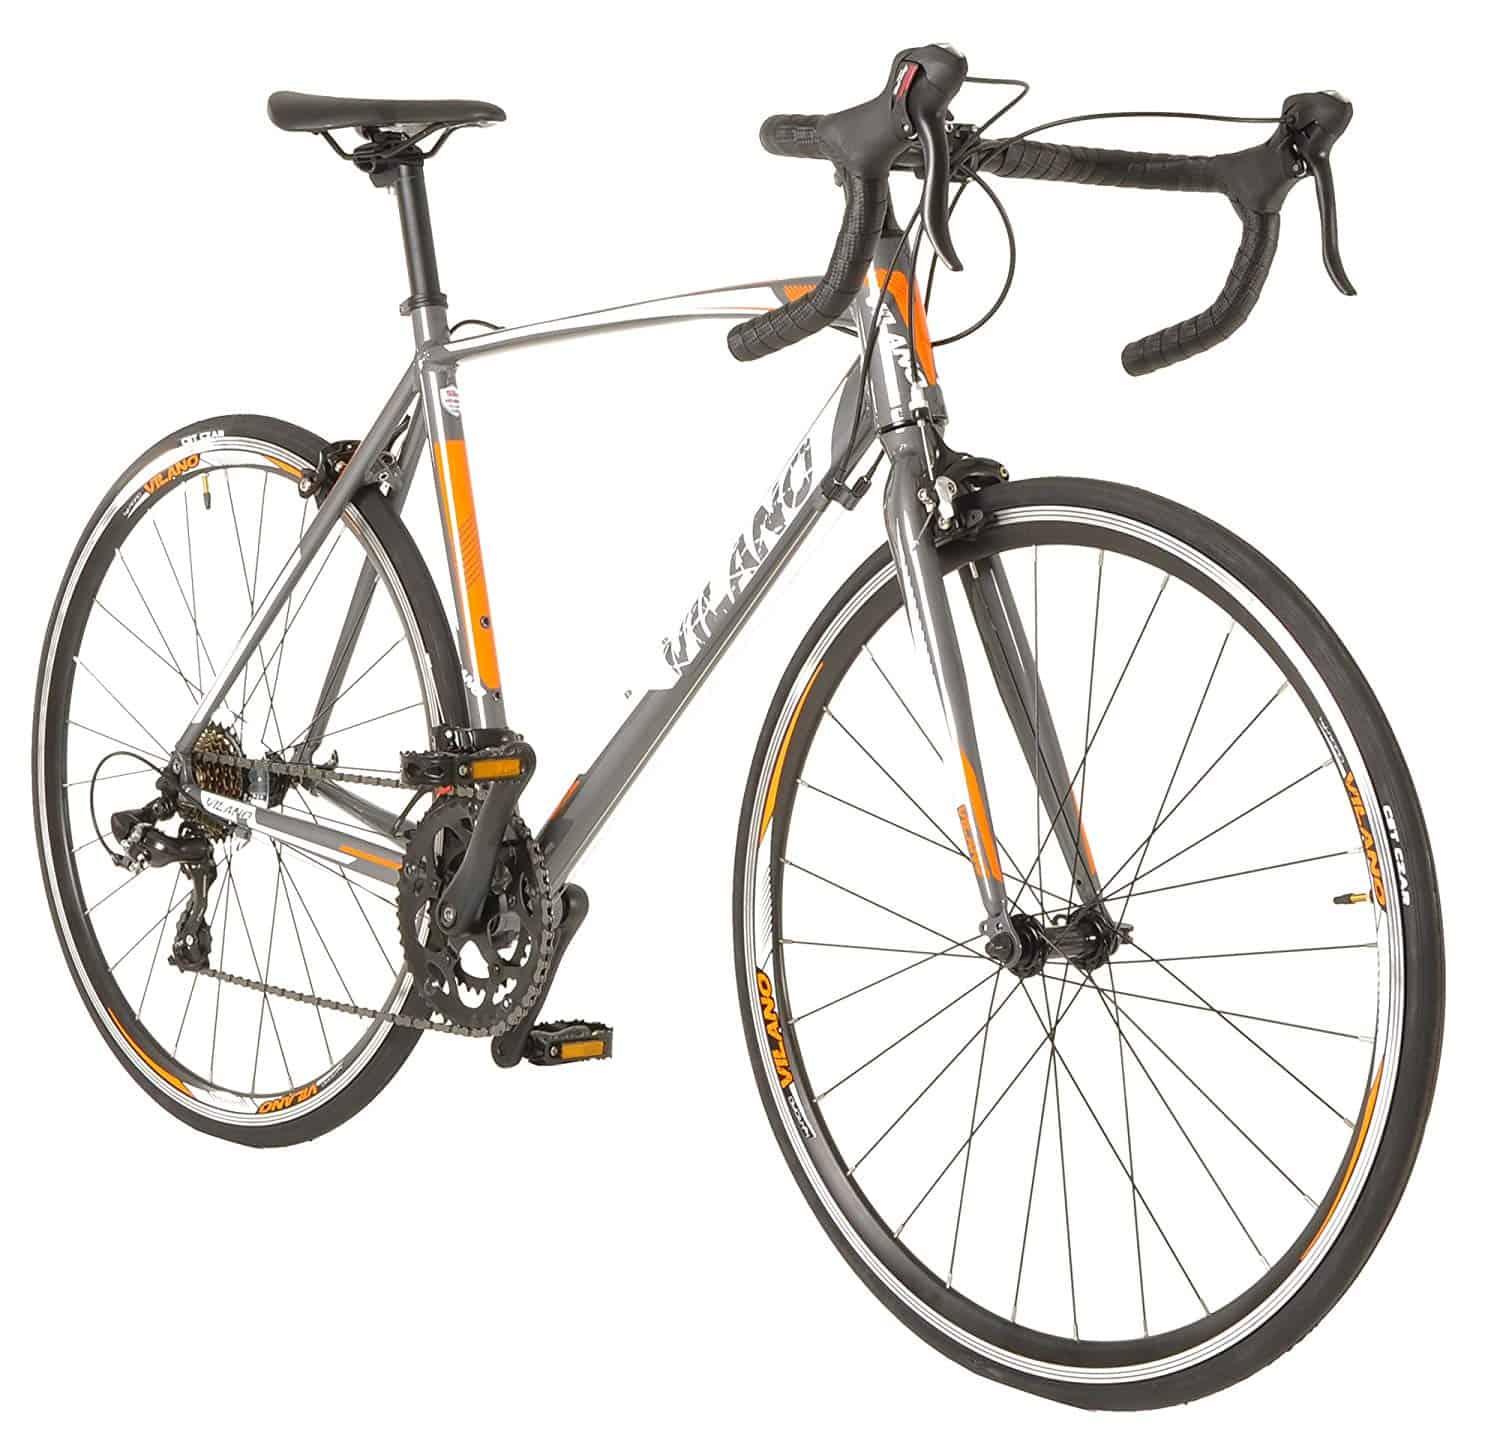 Vilano Shadow, one of the best road bikes under five hundred dollars